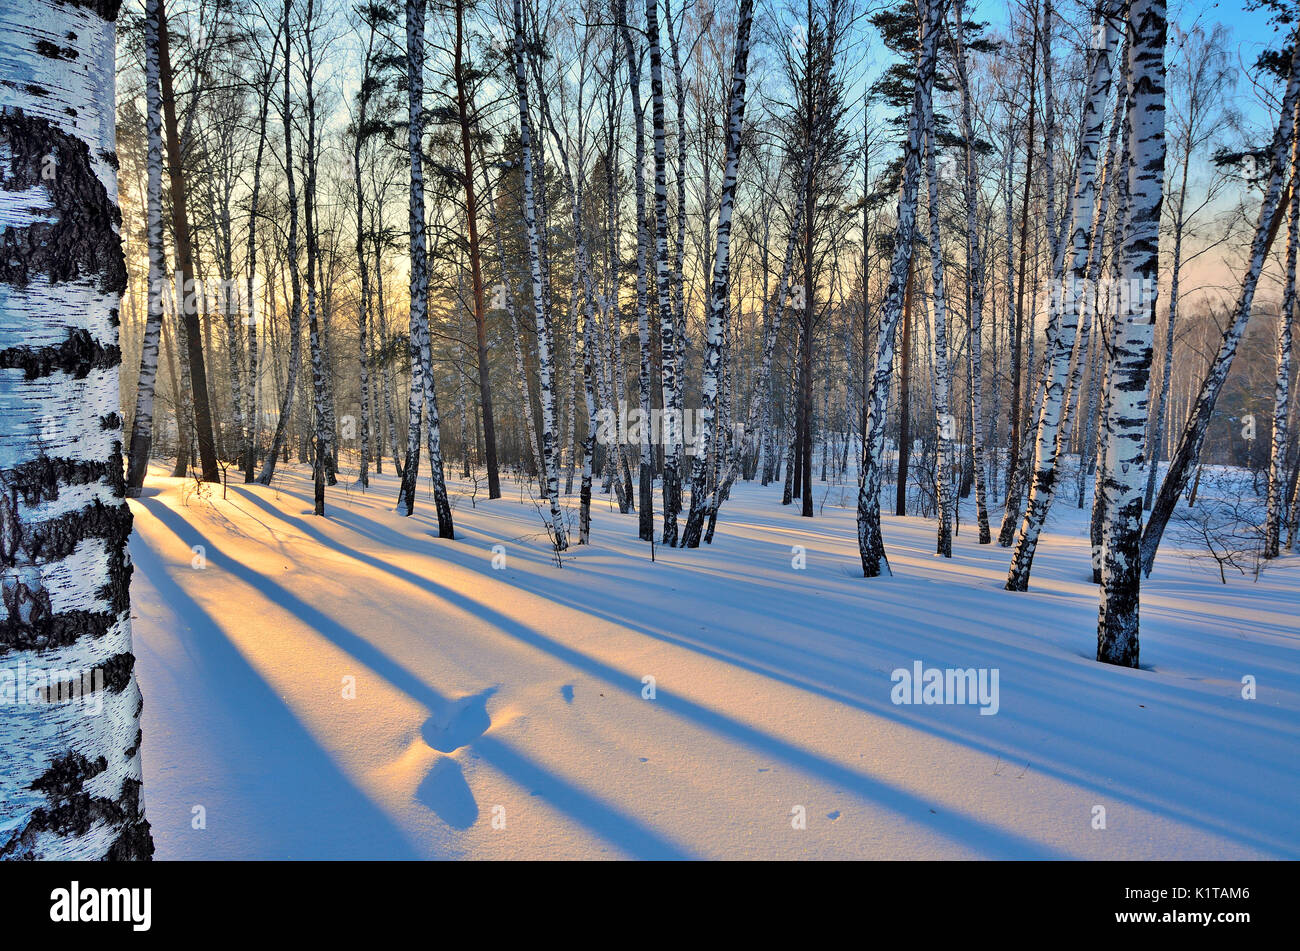 Winter landscape - Sunset in the birch grove. Golden sunlight among white trunks of birch trees and blue shadow on the white snow. Stock Photo